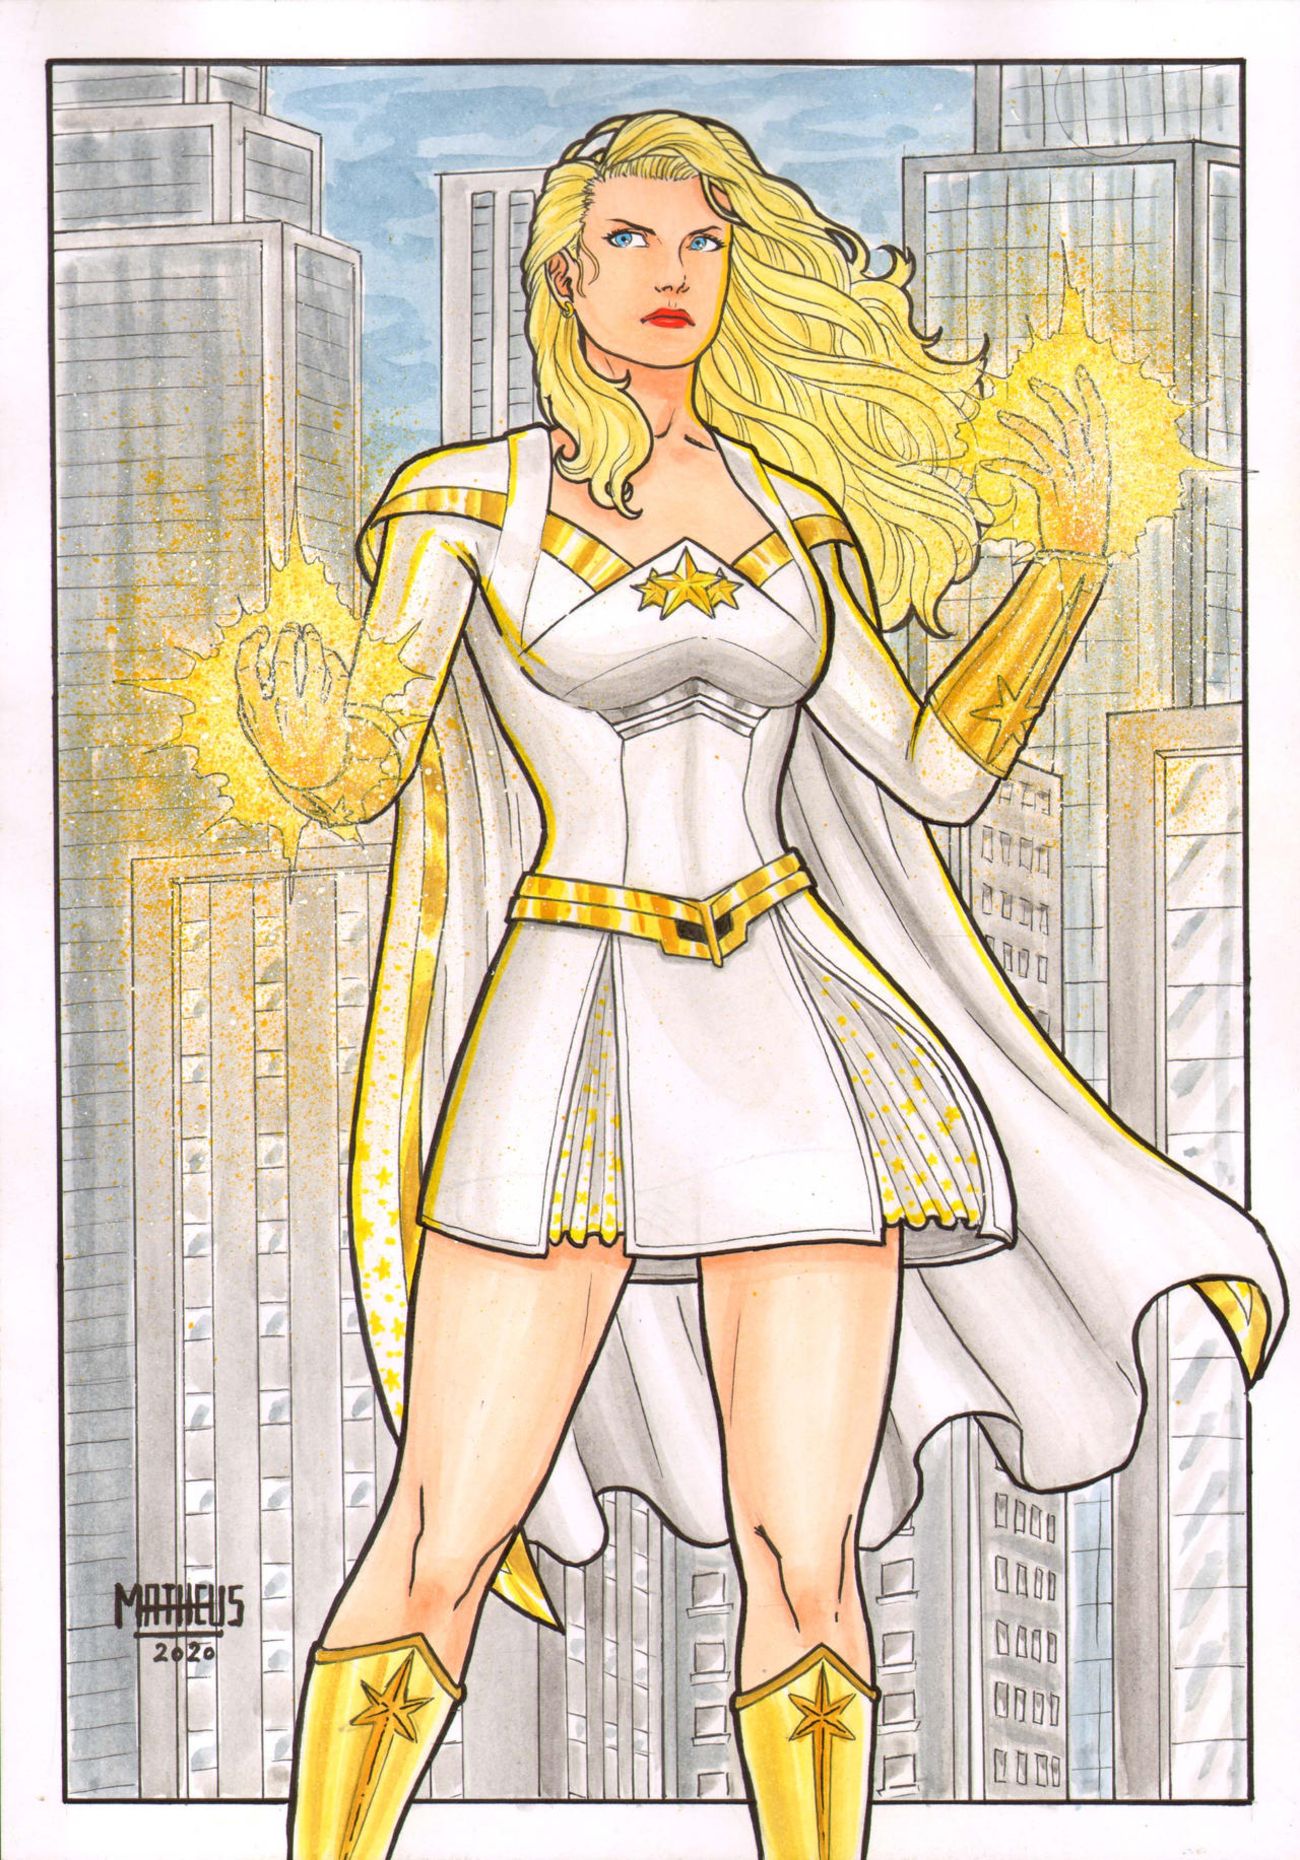 Starlight wearing her classic outfit striking a superhero pose in front of a skyline in fan art from The Boys by Matheus Gomes